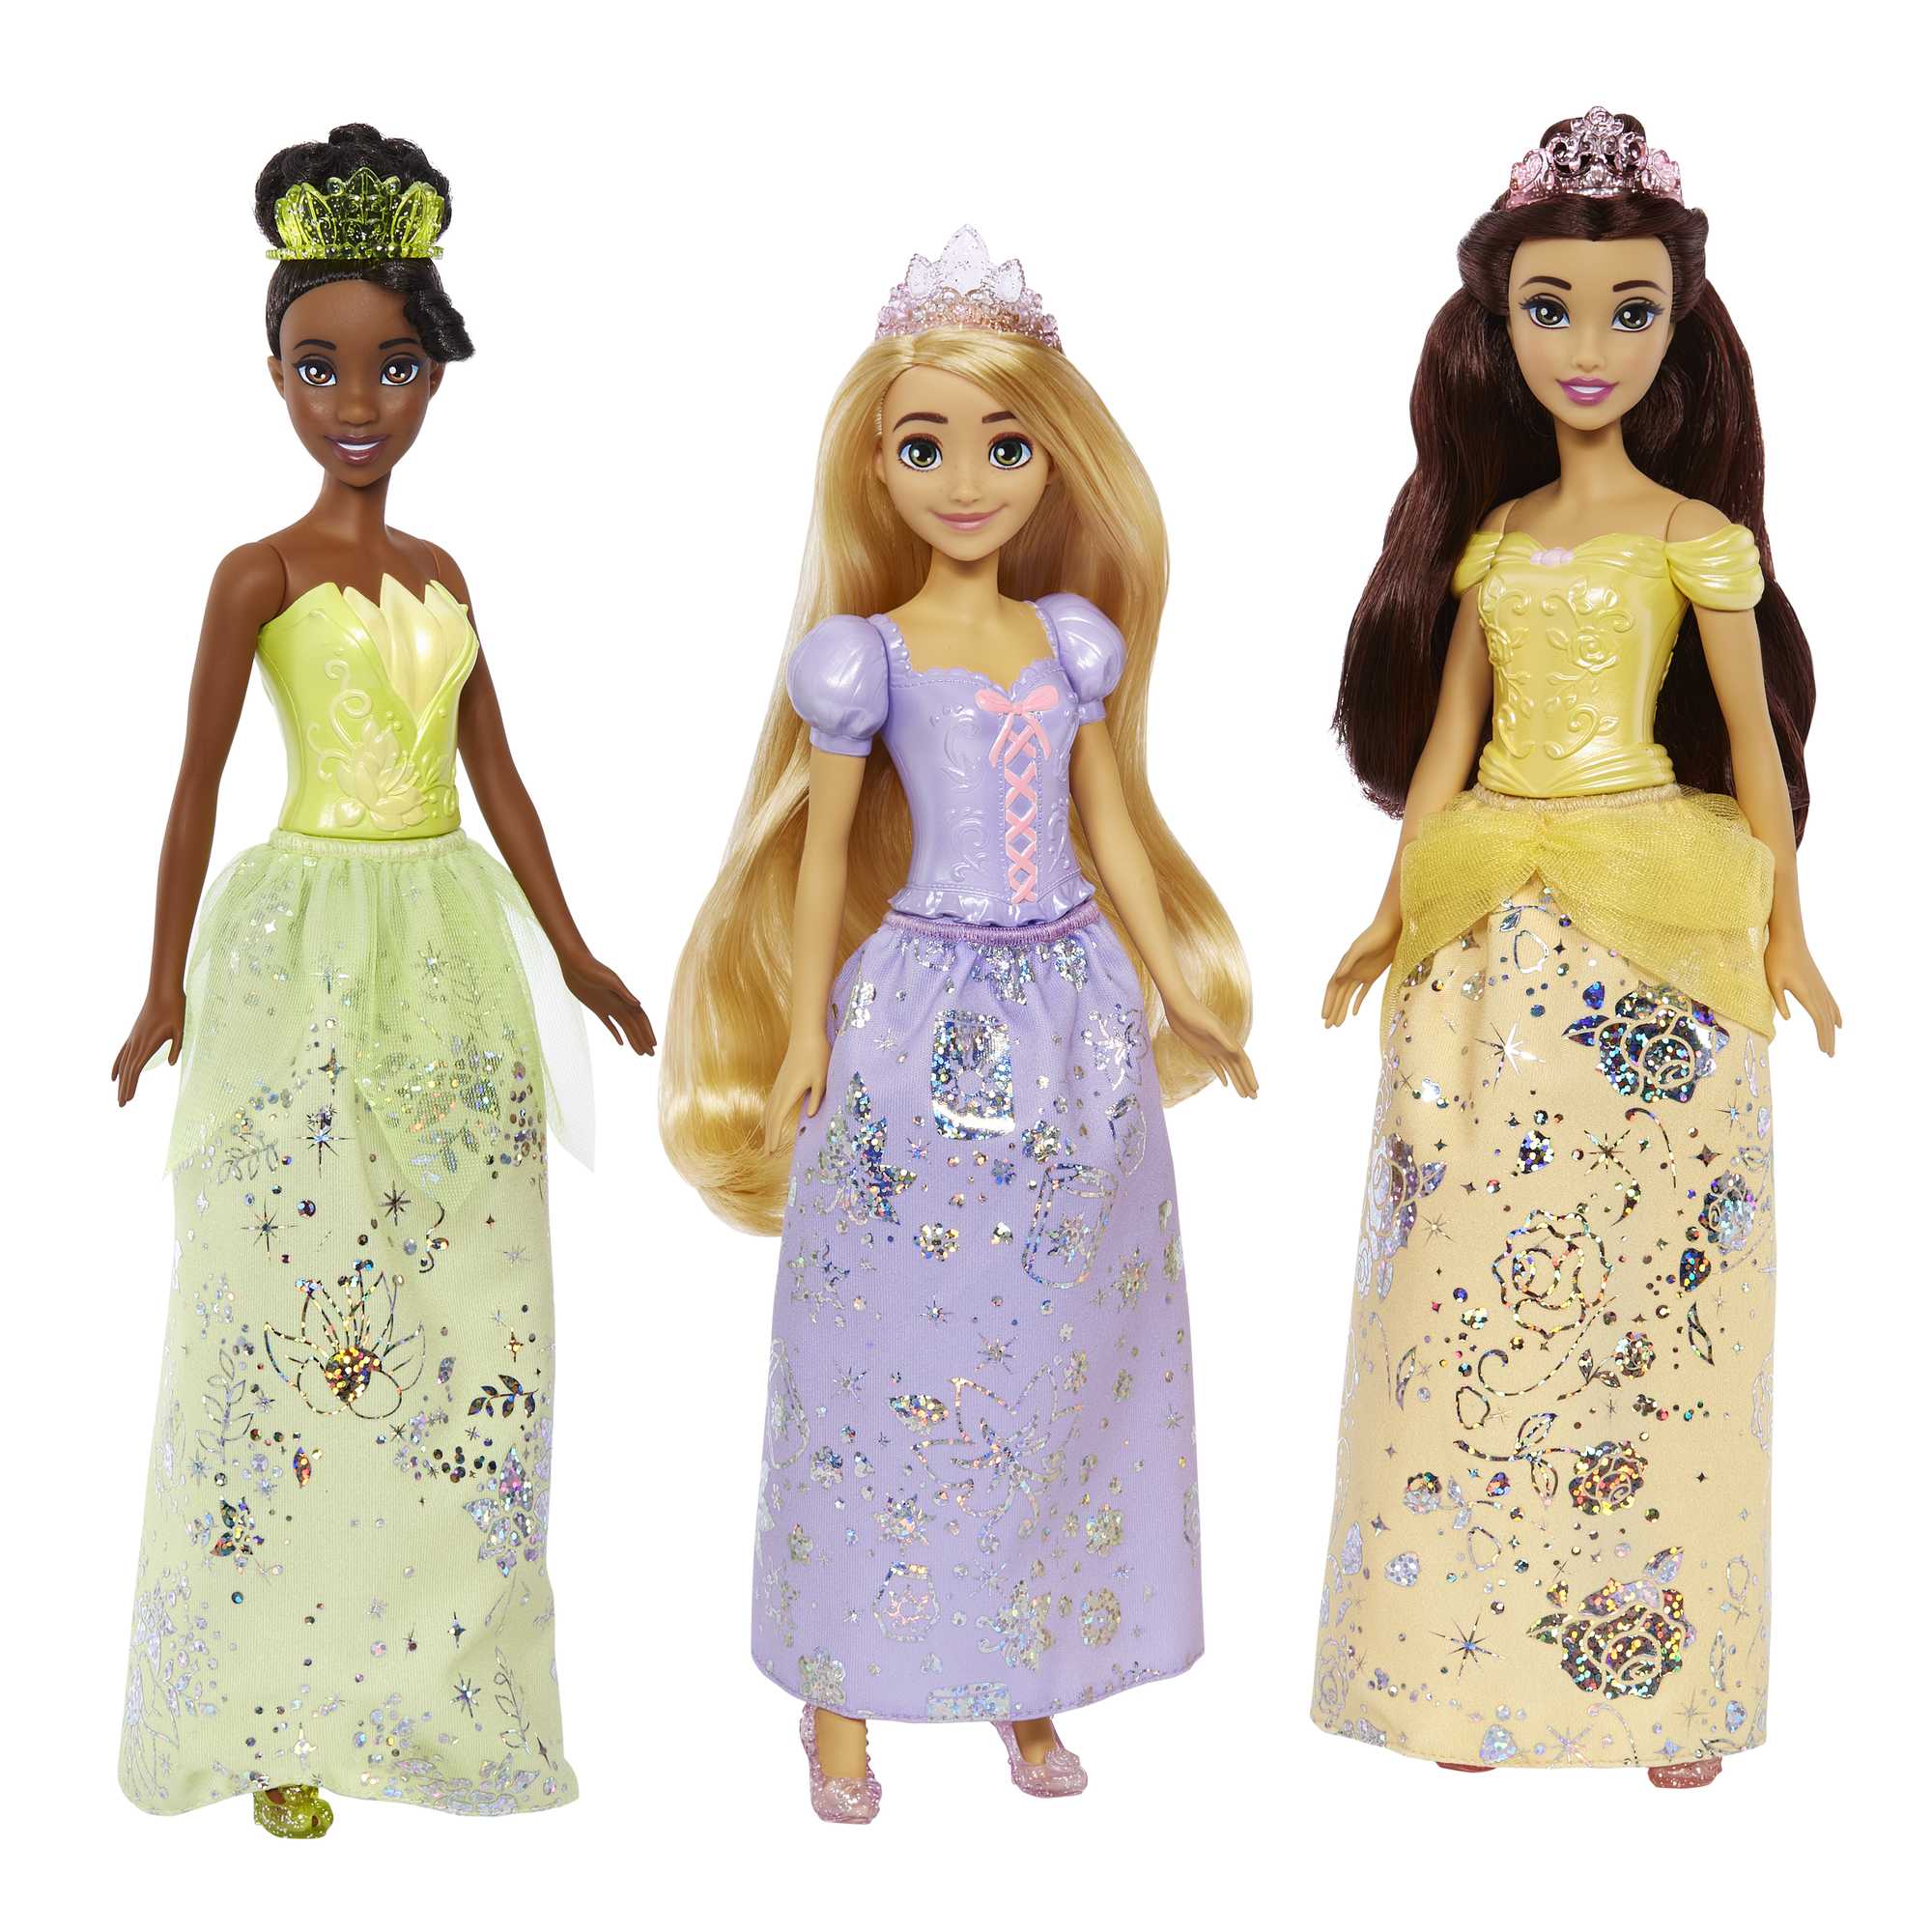 Disney Princess Toys, 7 Princess Dolls and Accessories, Gifts for Kids |  Mattel